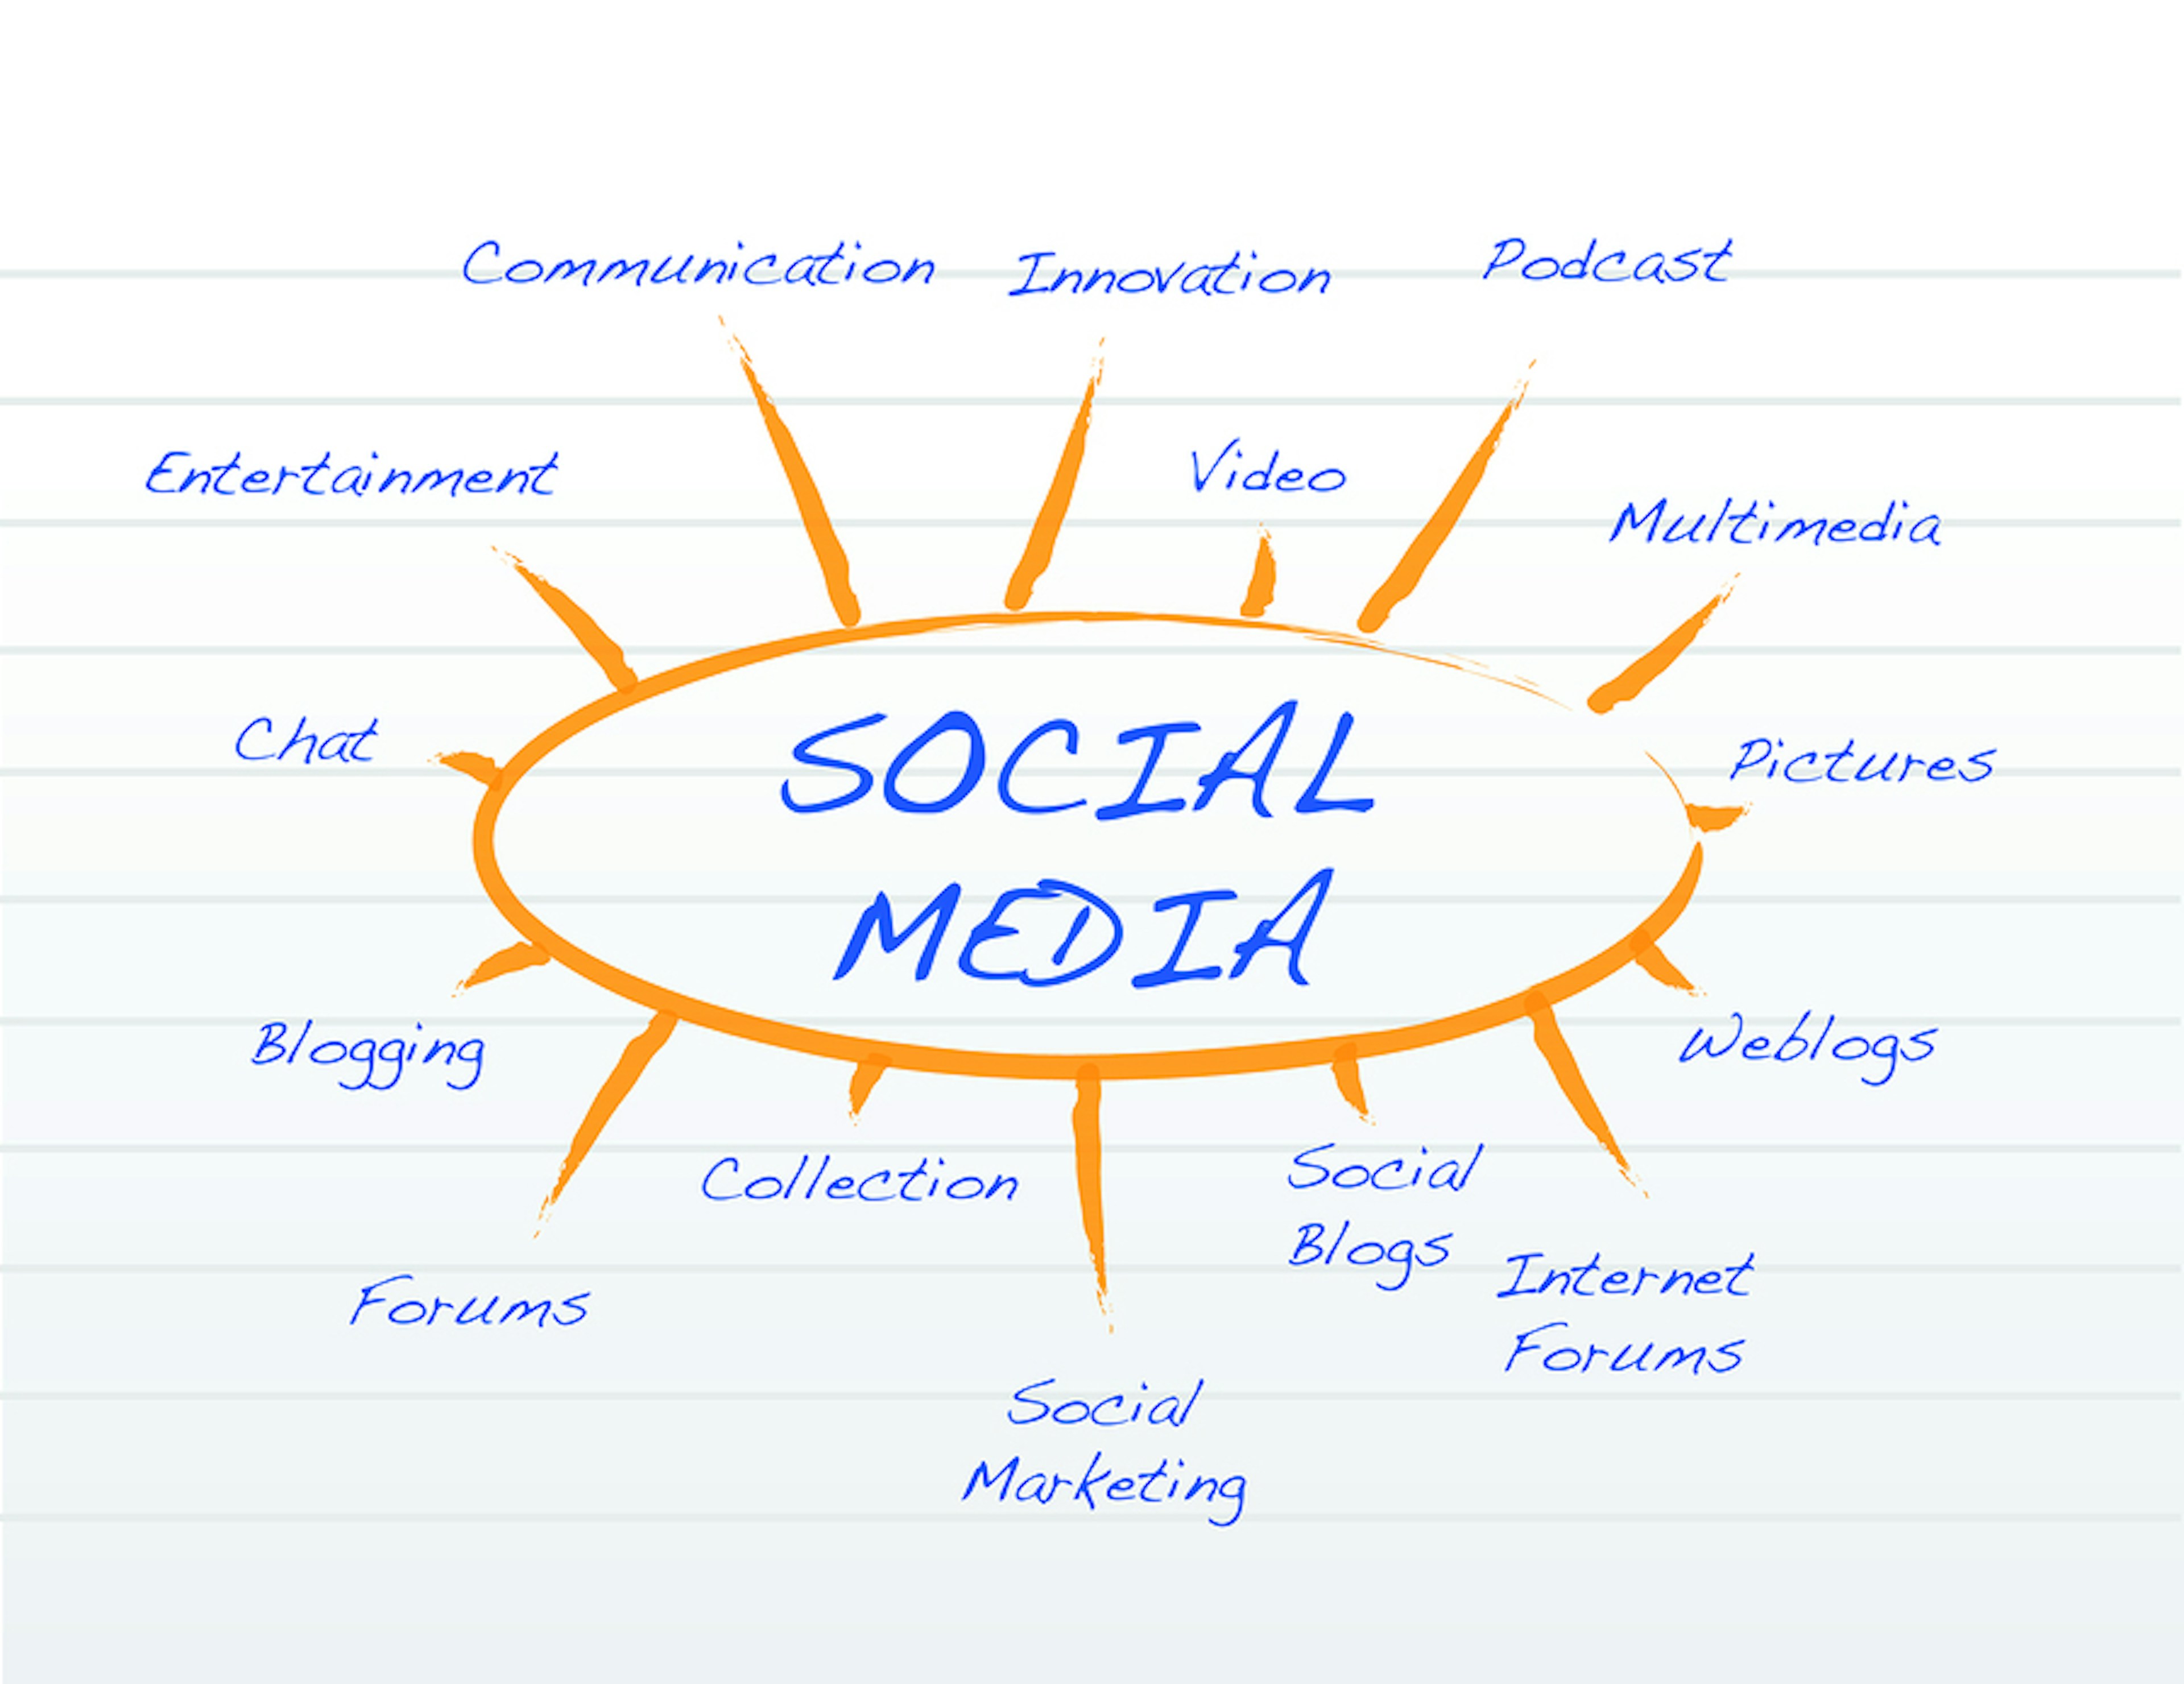 What Is Social Media Marketing and What Could It Do For Me?